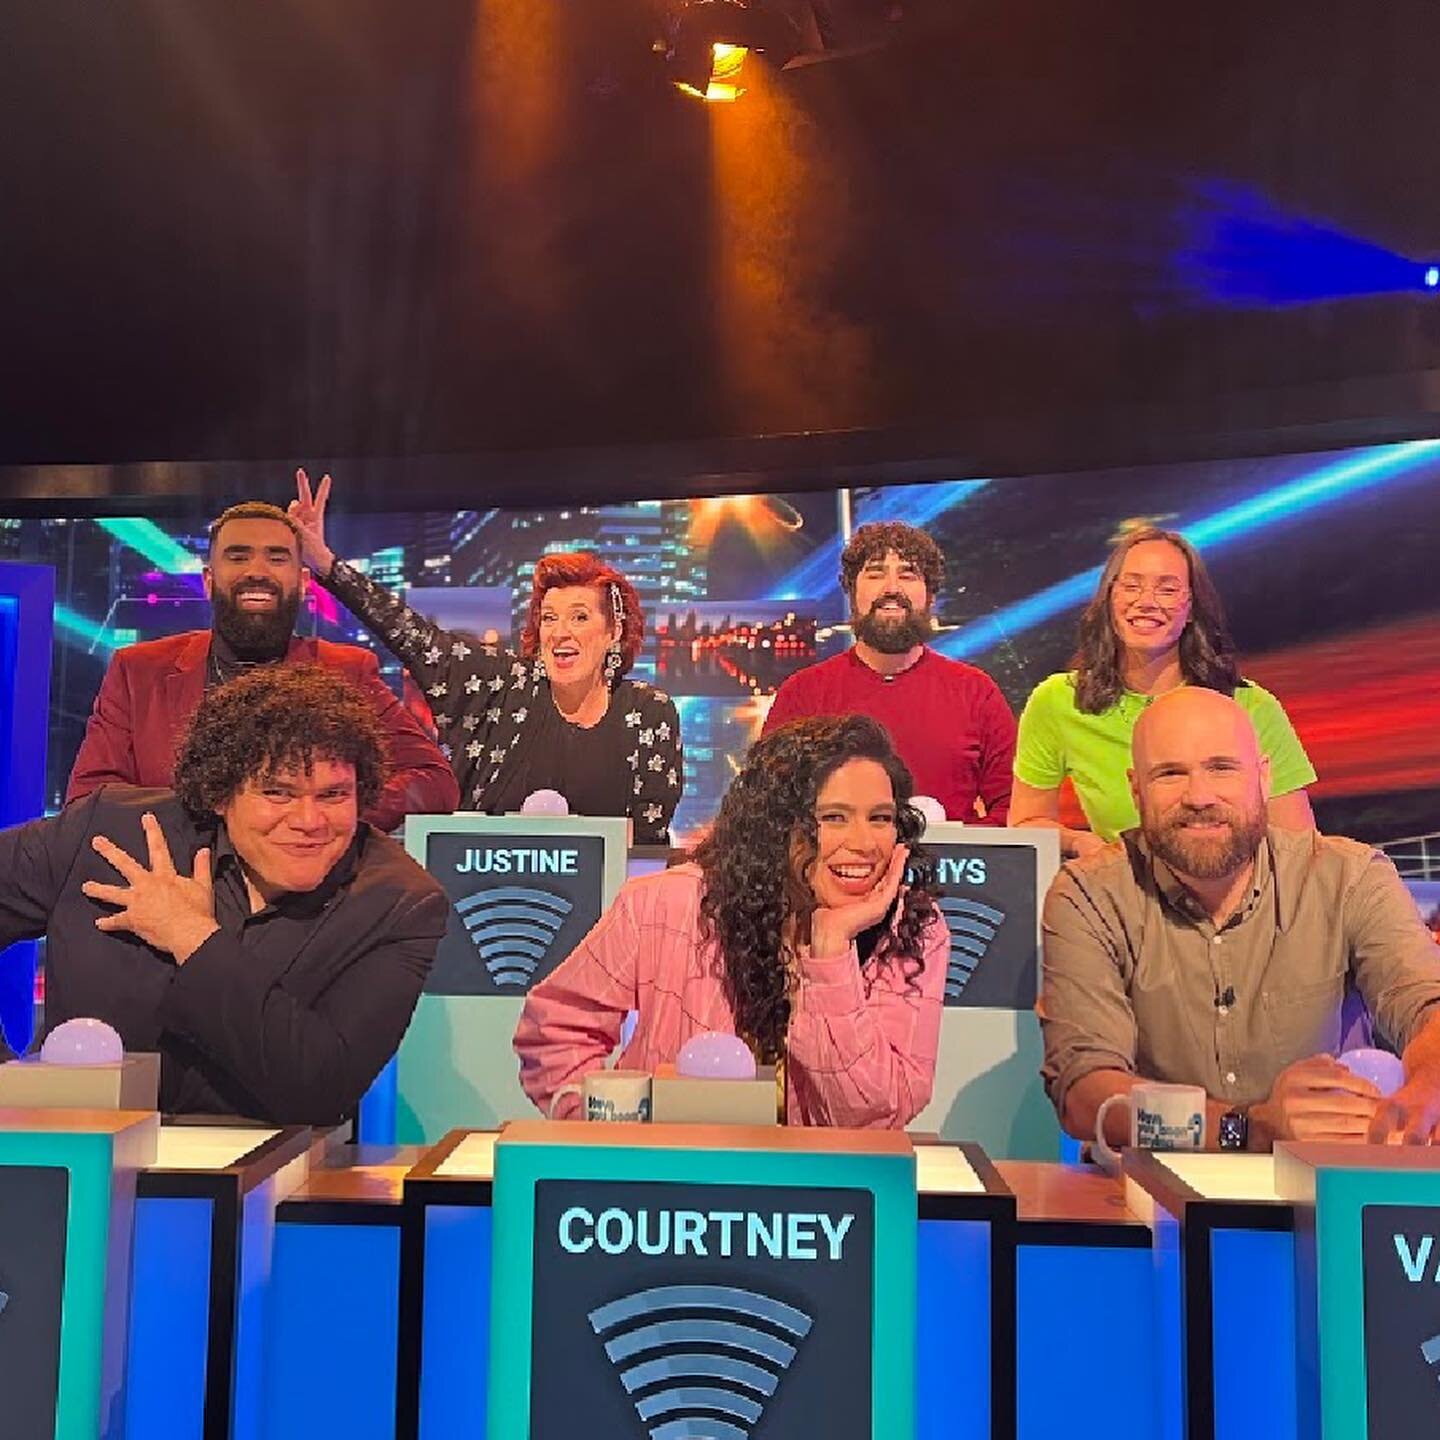 Catch me and these mates on HYBPA tonight!!! #hybpanz